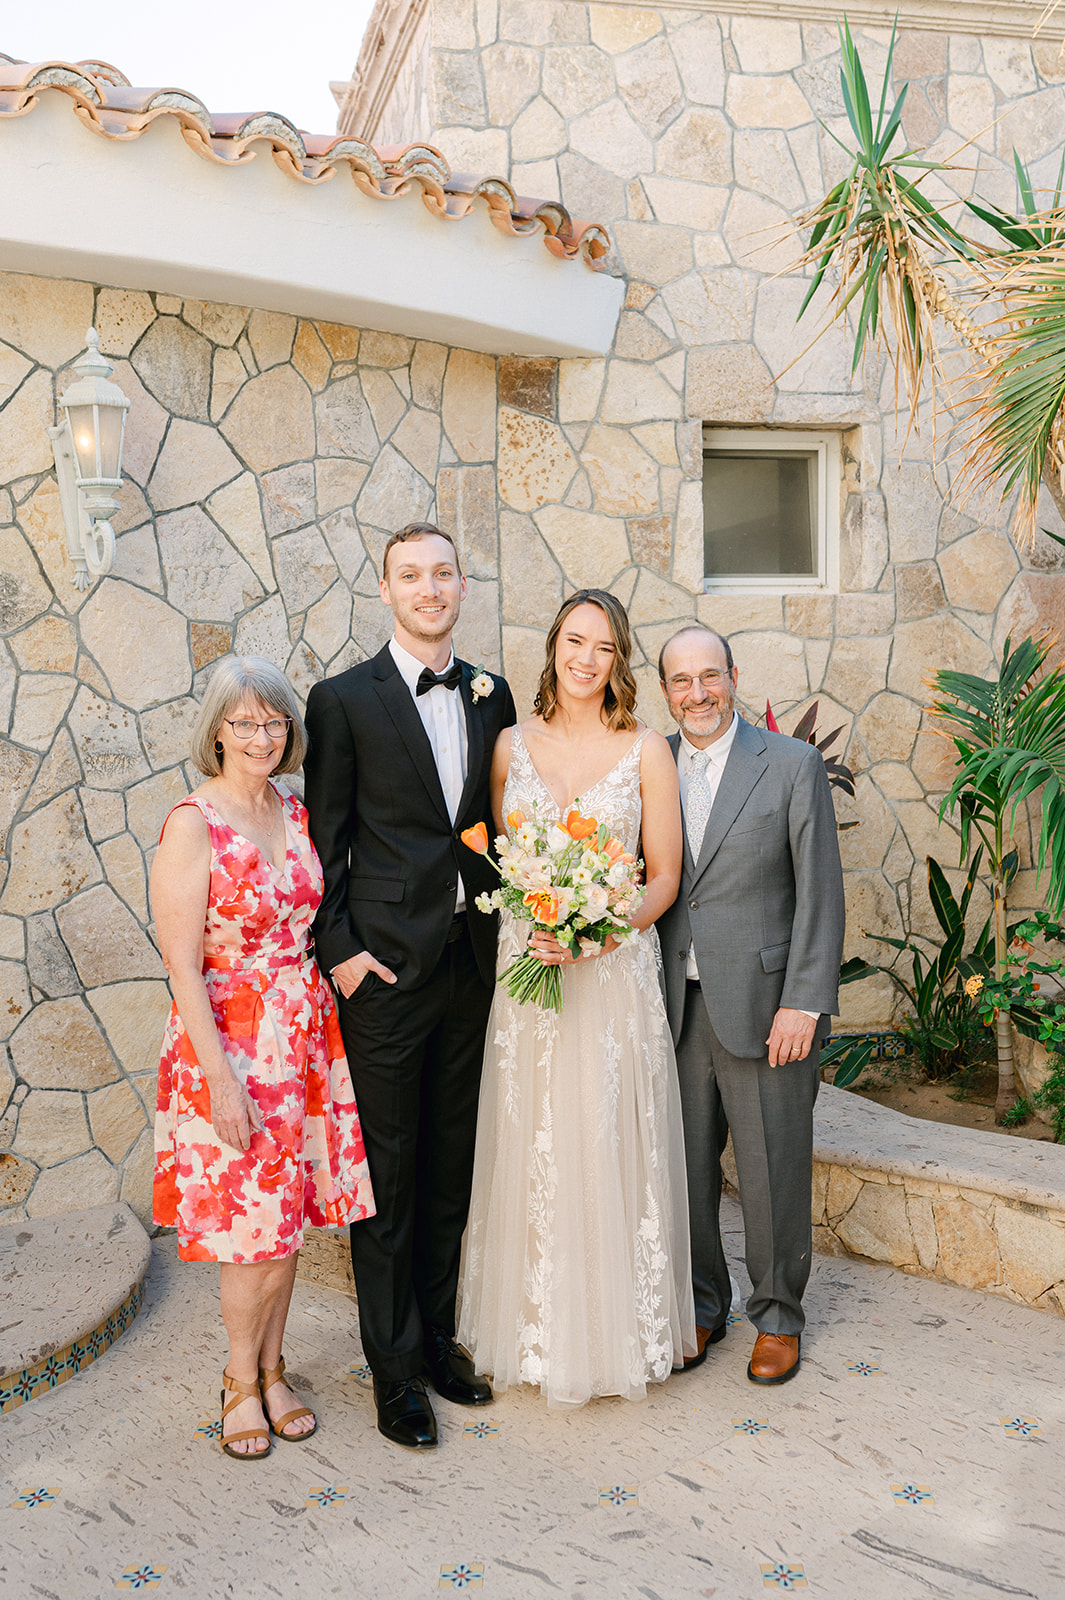 Villa Marcella family portraits at an intimate wedding weekend in Cabo.